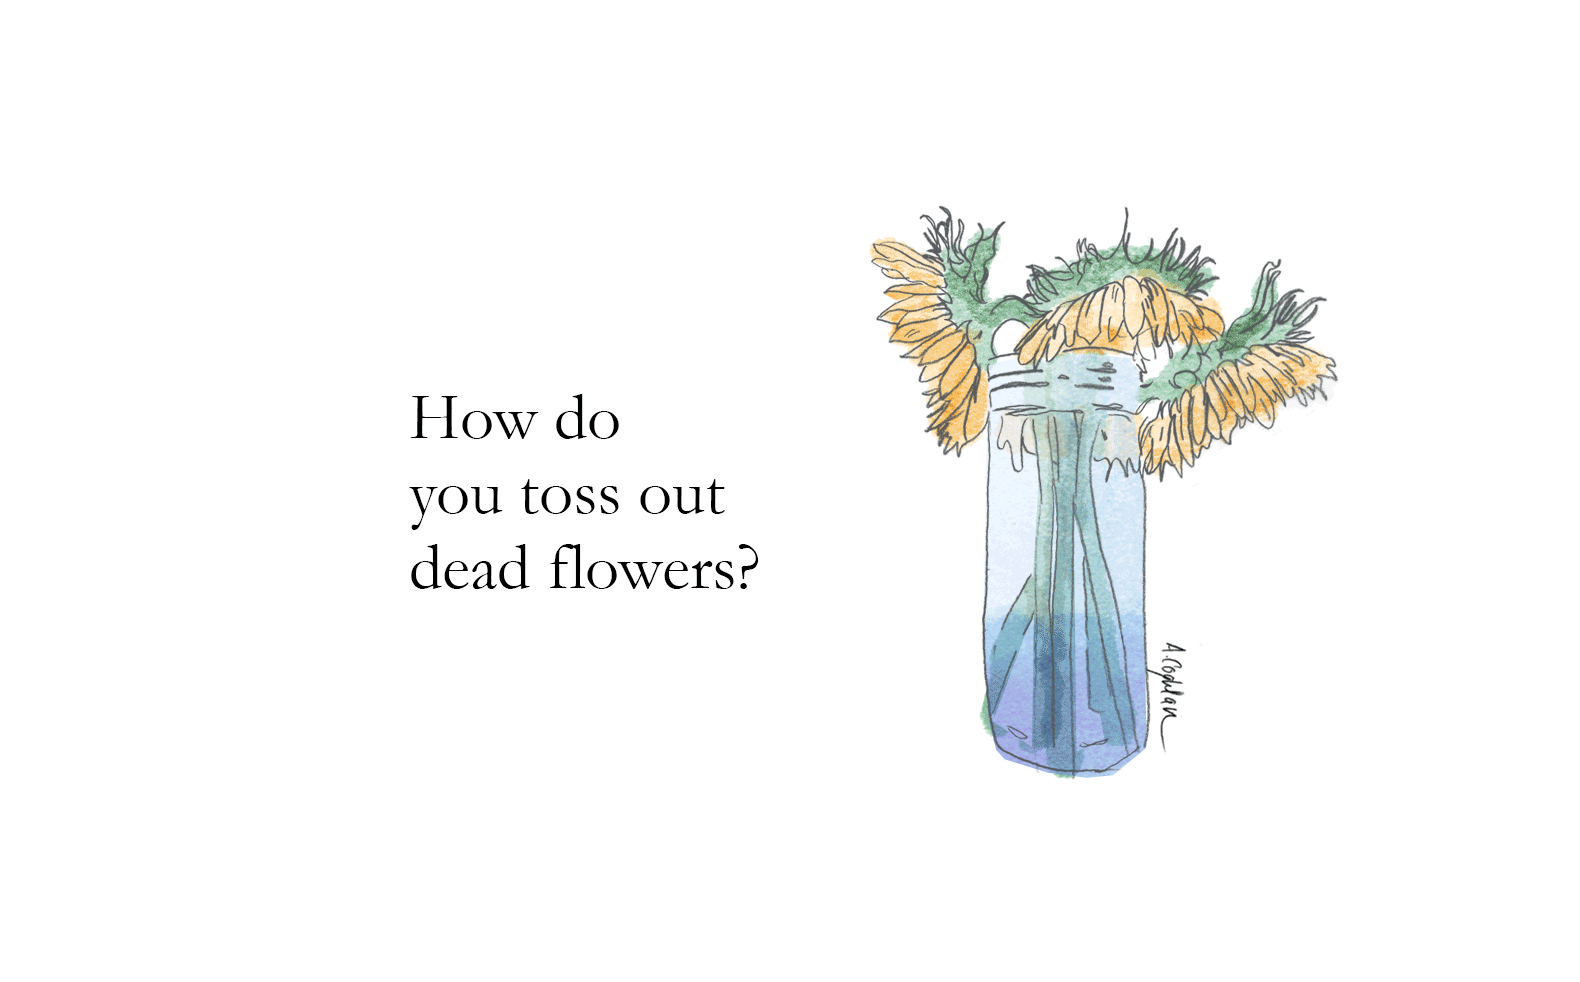 An illustration of dying sunflowers with an accompanying question “How do you toss out dead flowers?”